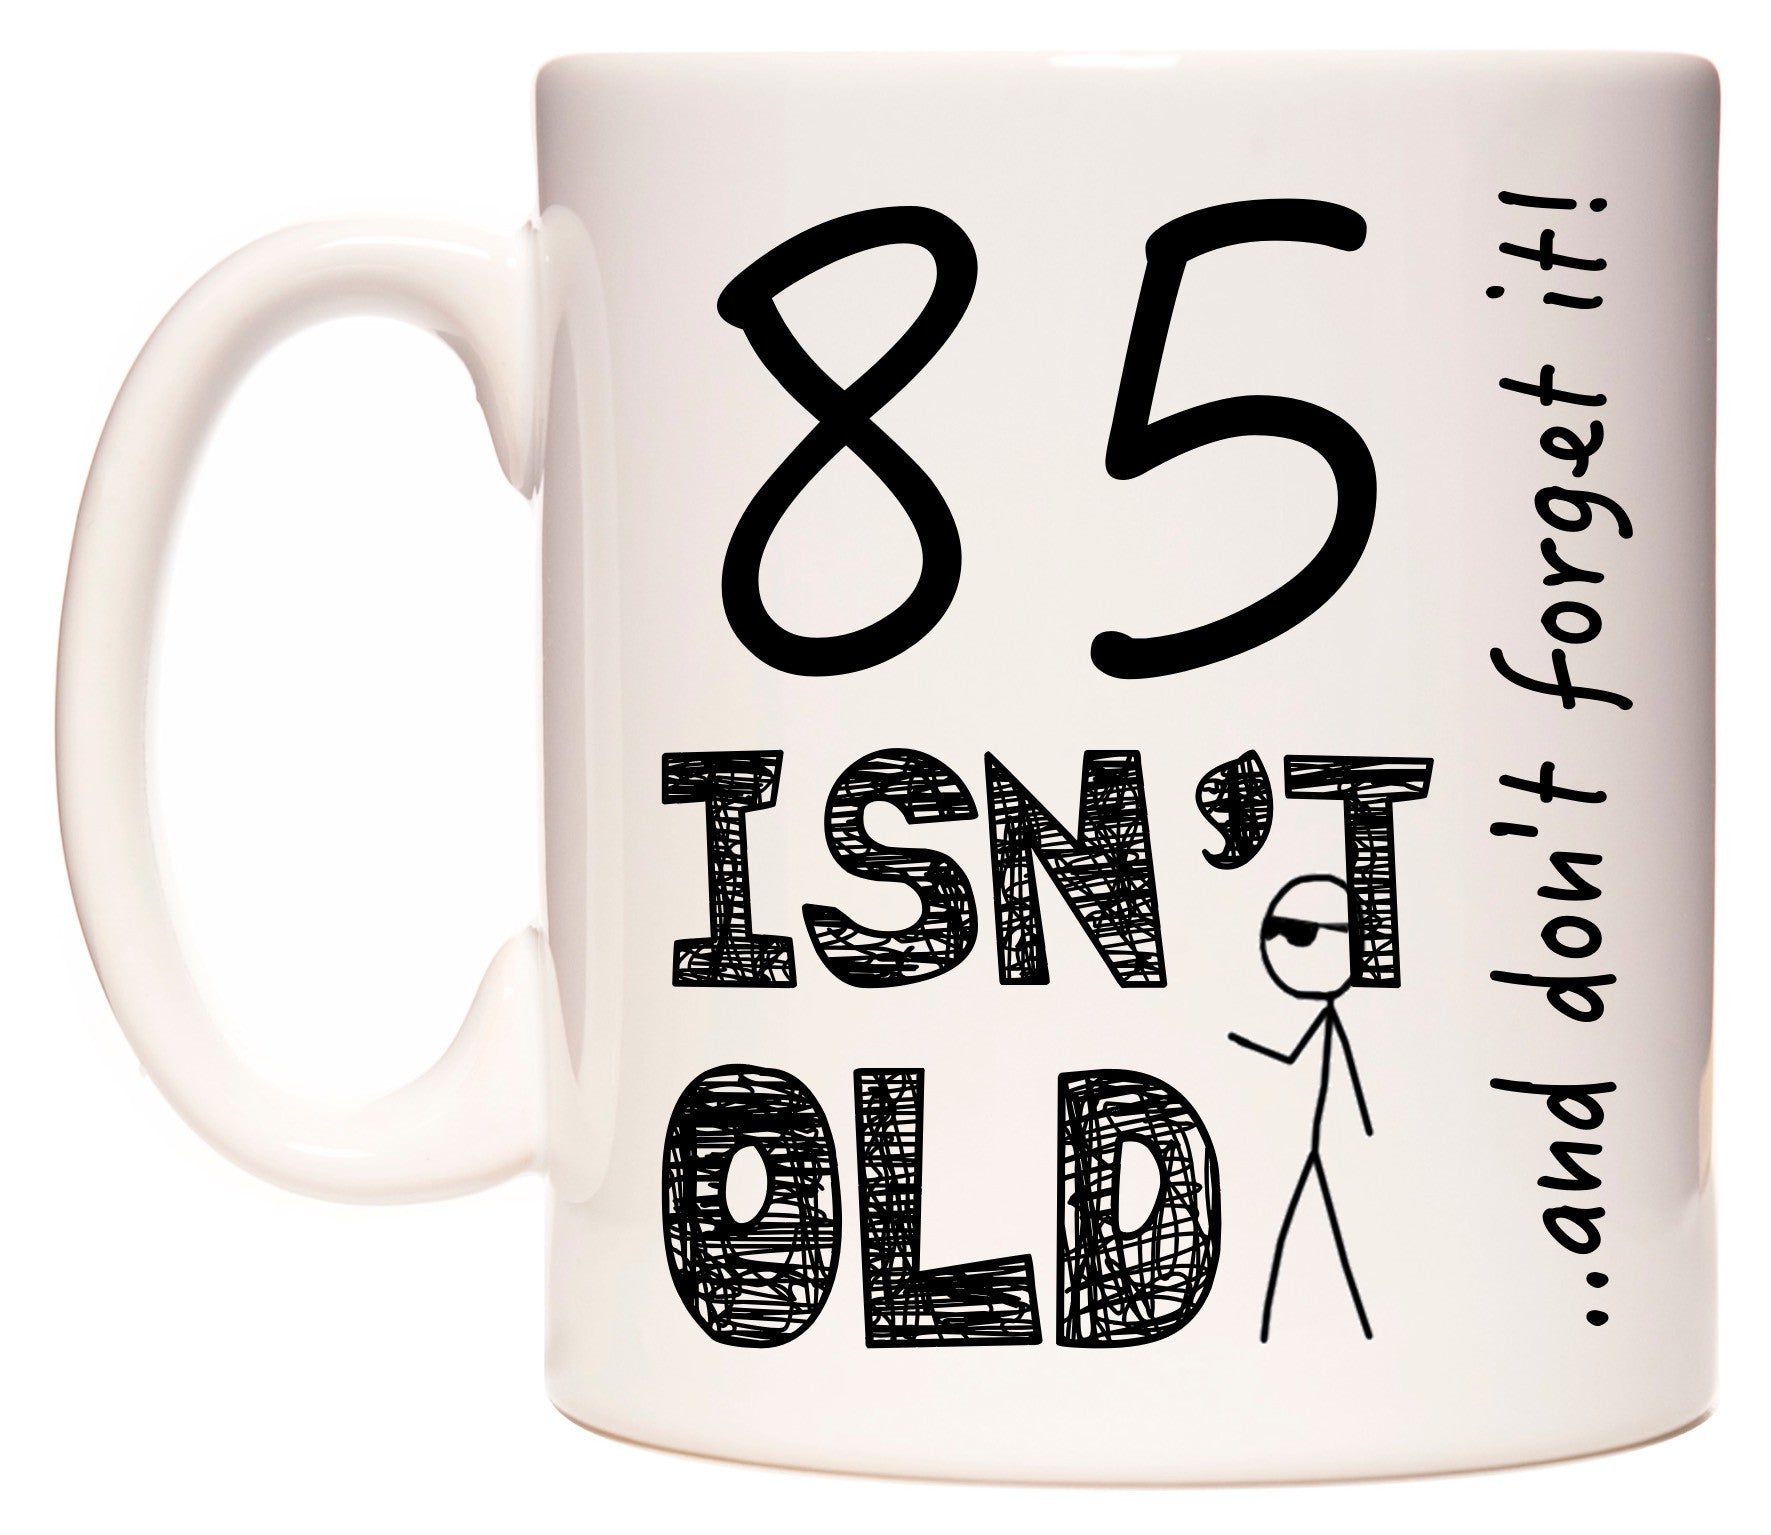 This mug features 85 Isn't Old